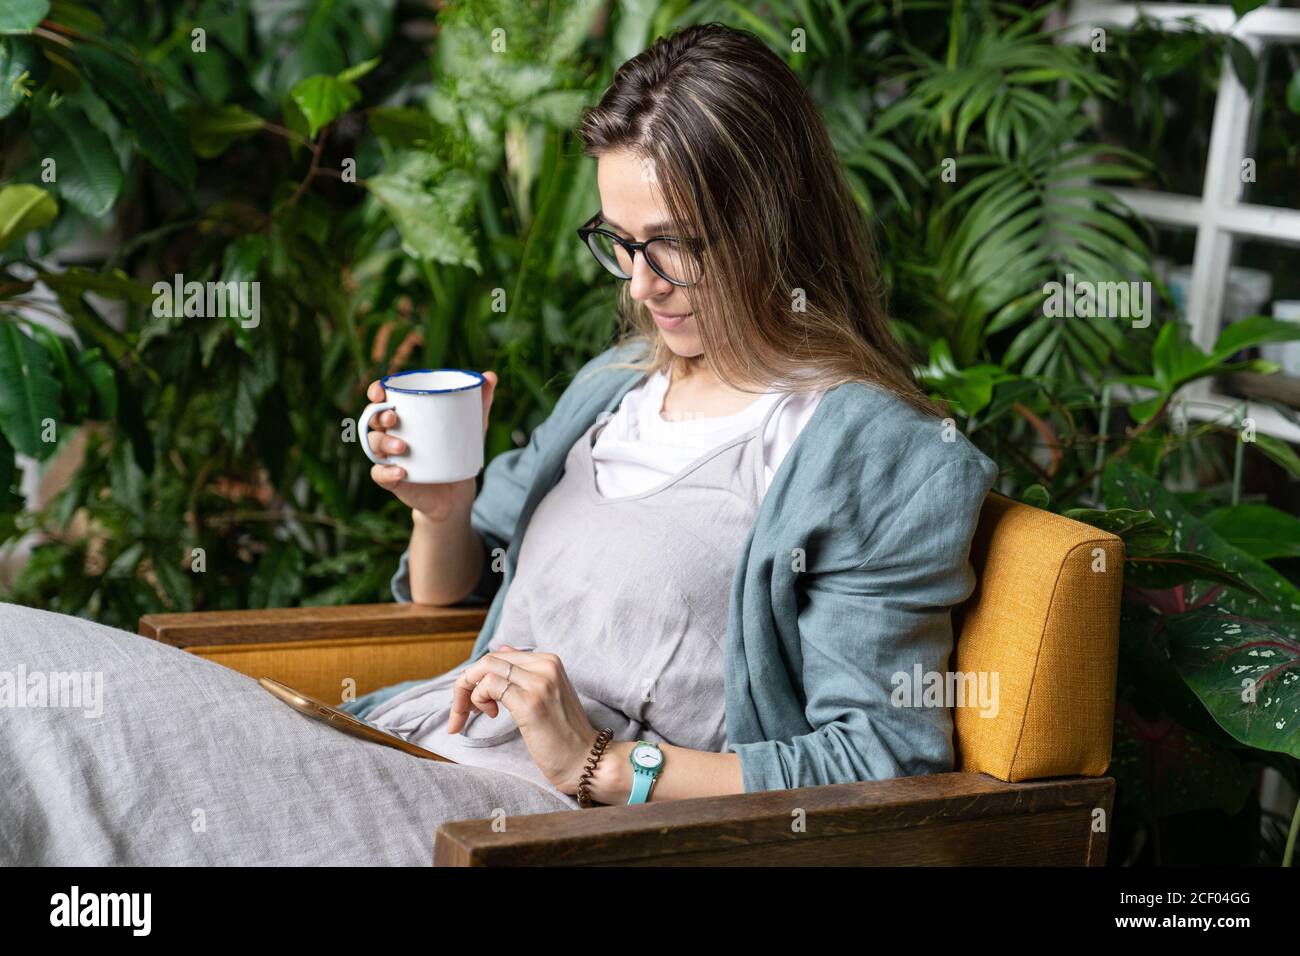 Female gardener wear linen dress, sitting on chair in green house, resting, using smartphone and drinking tea from a mug in harmony with the plants ar Stock Photo